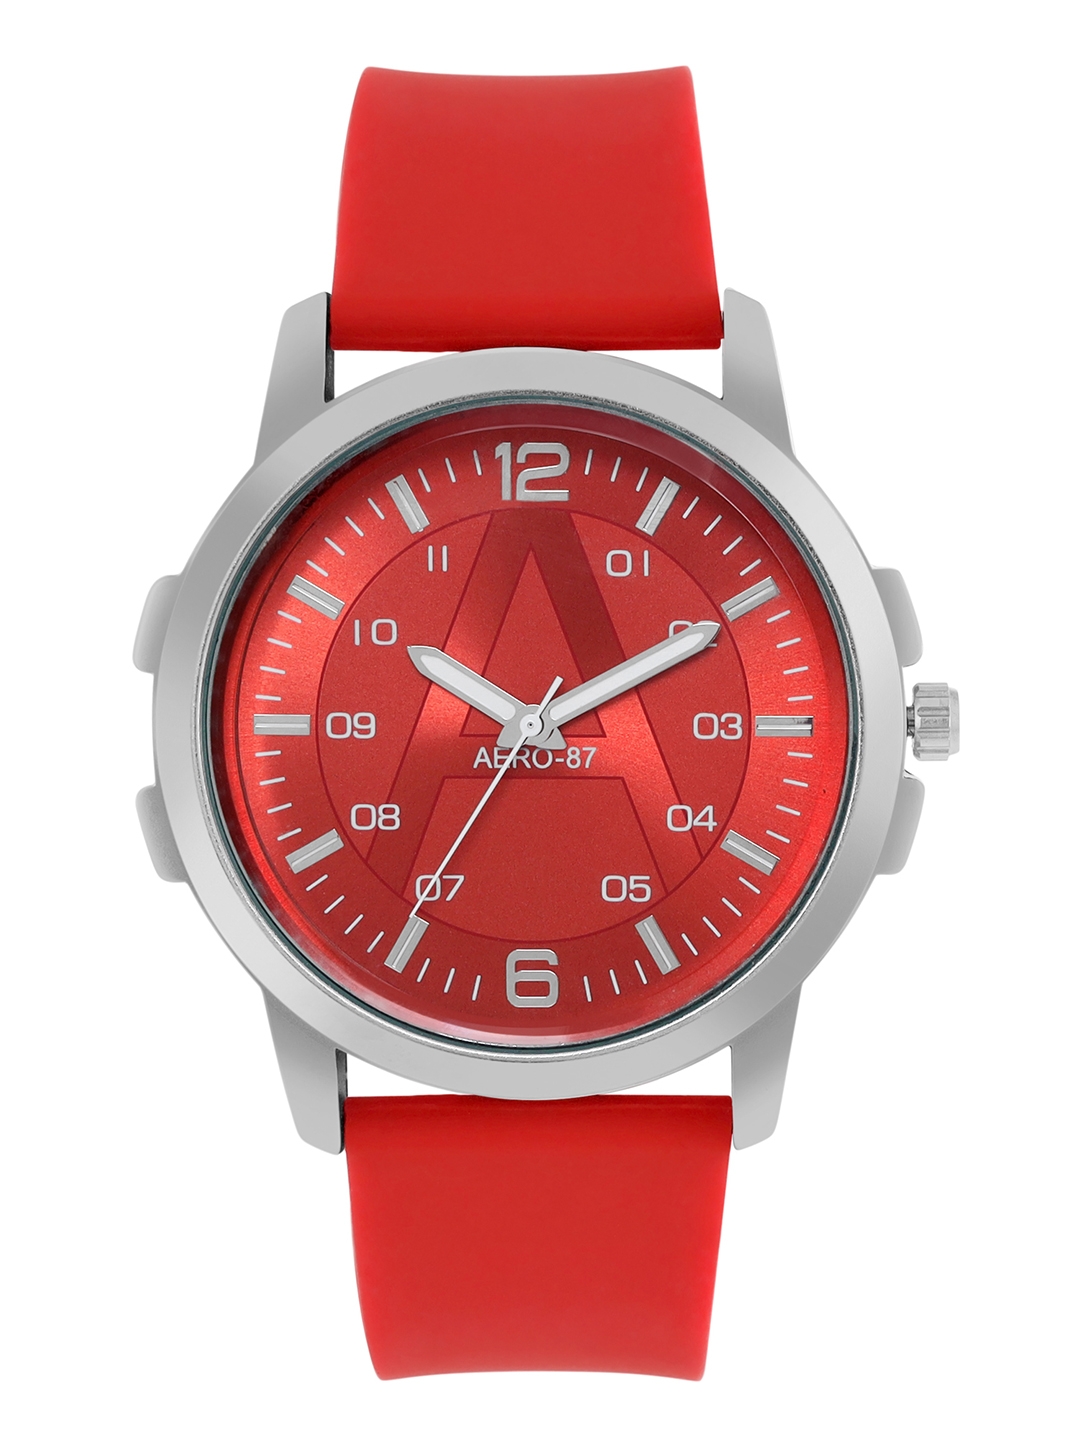 Aeropostale "AERO_AW_A10-5_RD" Classic Men’s Analog Quartz Wrist Watch, Silver Metal Alloy case, Red Dial with contrasting white hand,